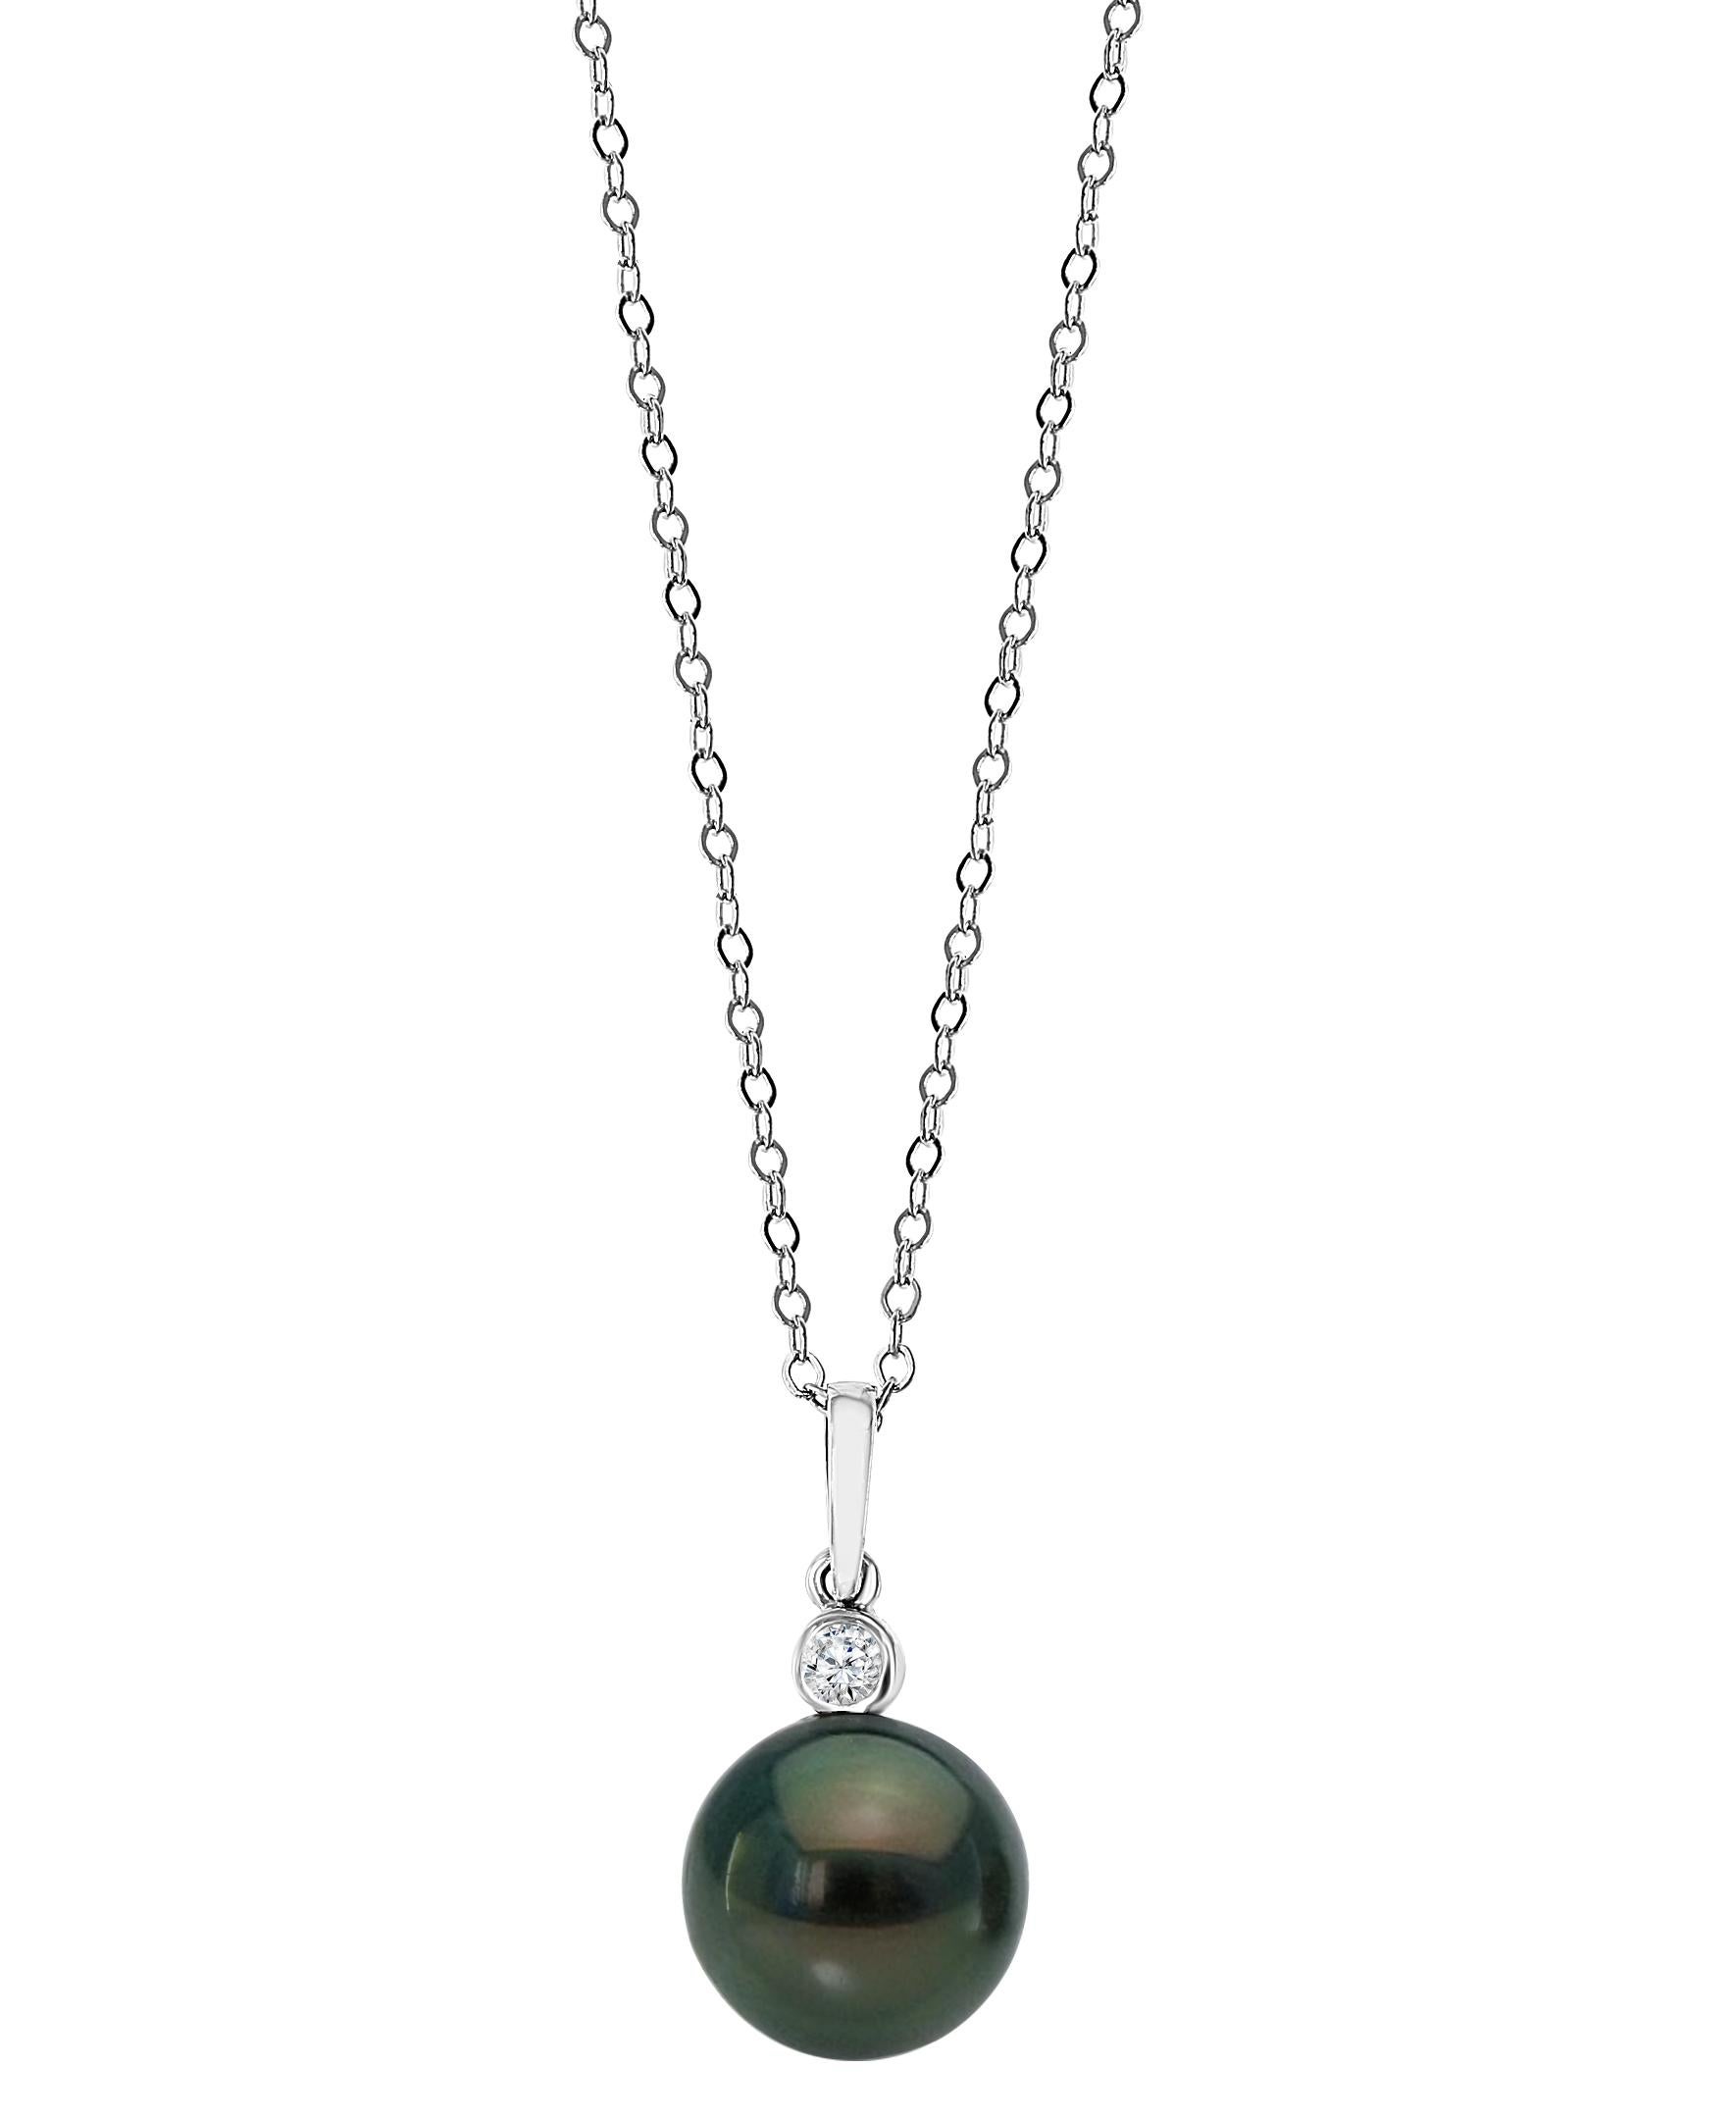 This iridescent South Sea Tahitian cultured round pearl dangles beneath a diamond set in 14K white gold. The pearl measures 8-9mm and there are 0.04 carats of diamonds. The pendant hangs from a 14K white gold adjustable chain with a maximum length